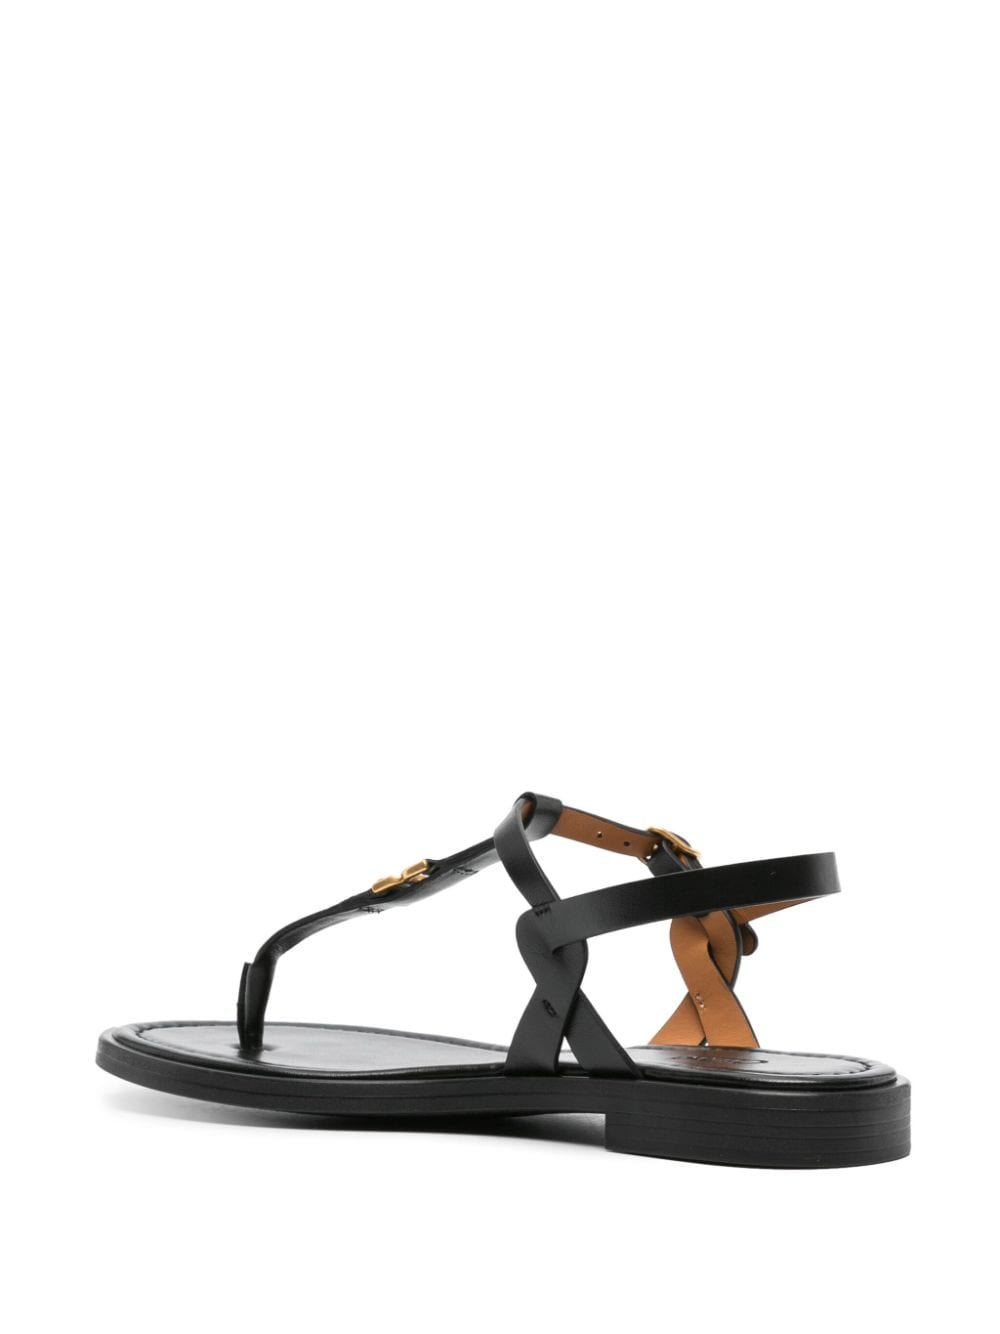 CHLOÉ Sleek Black Leather Sandals with Gold-Tone Hardware and Engraved Logo Details